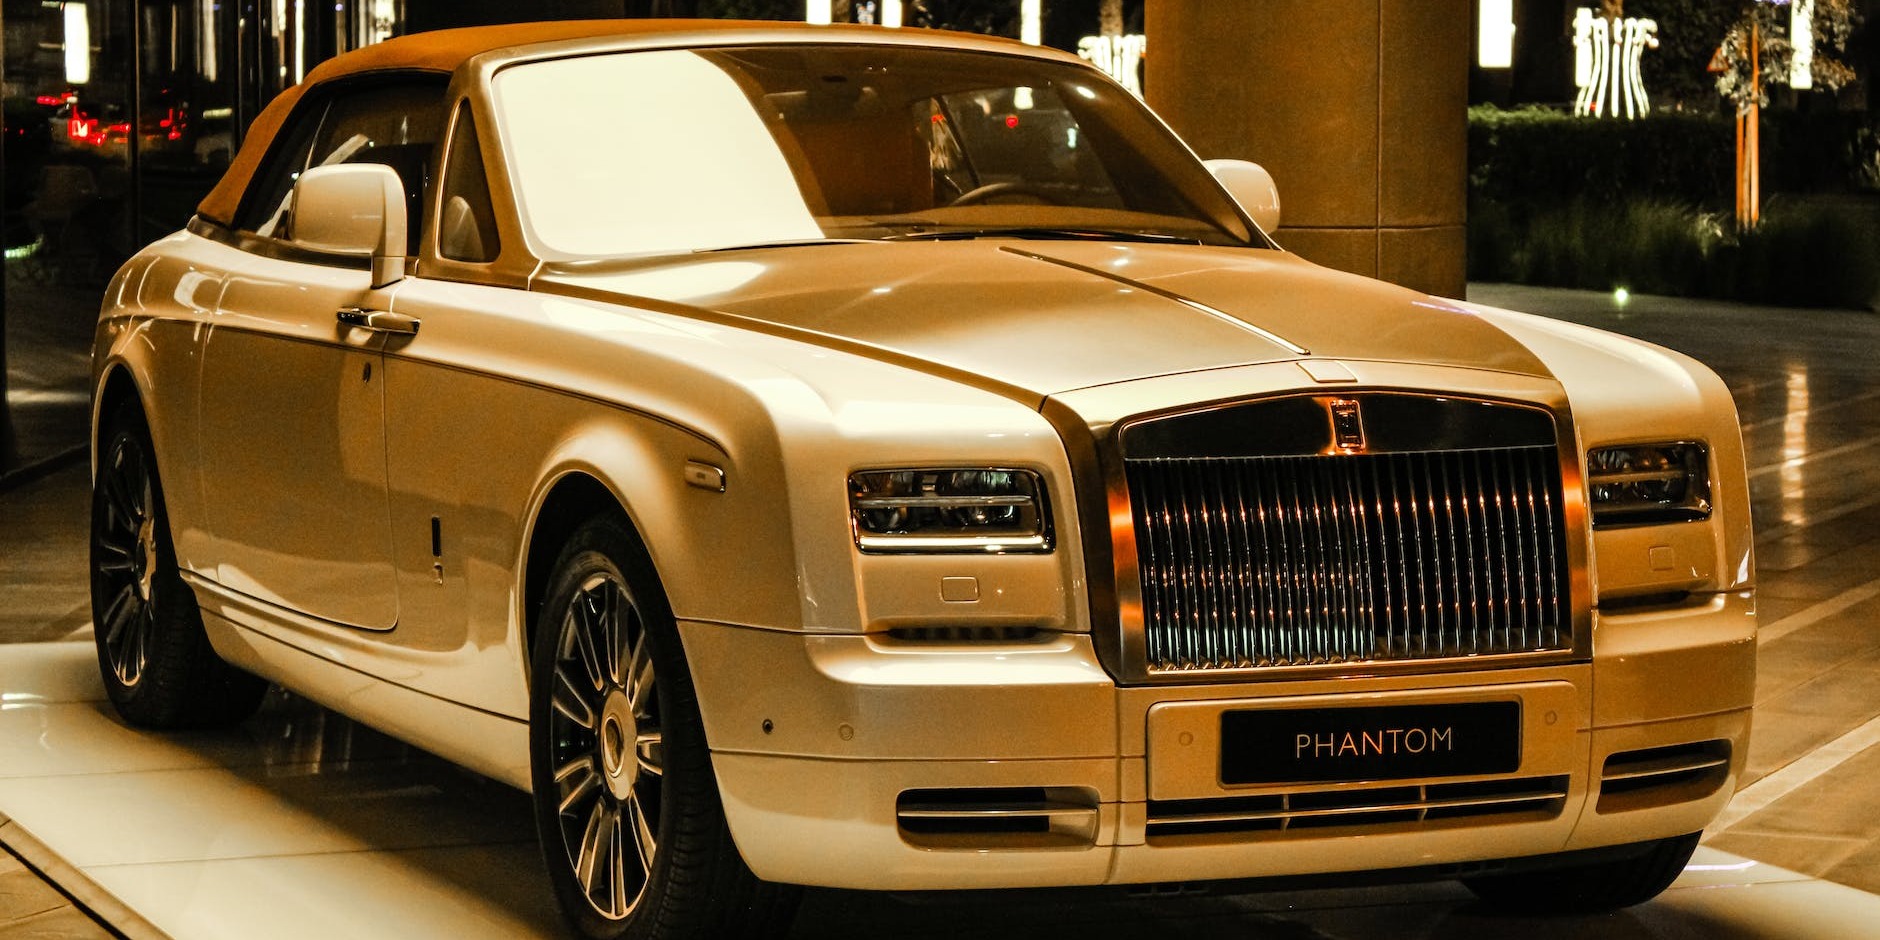 The Ultimate Guide to Experiencing a Rolls Royce Phantom in the UK